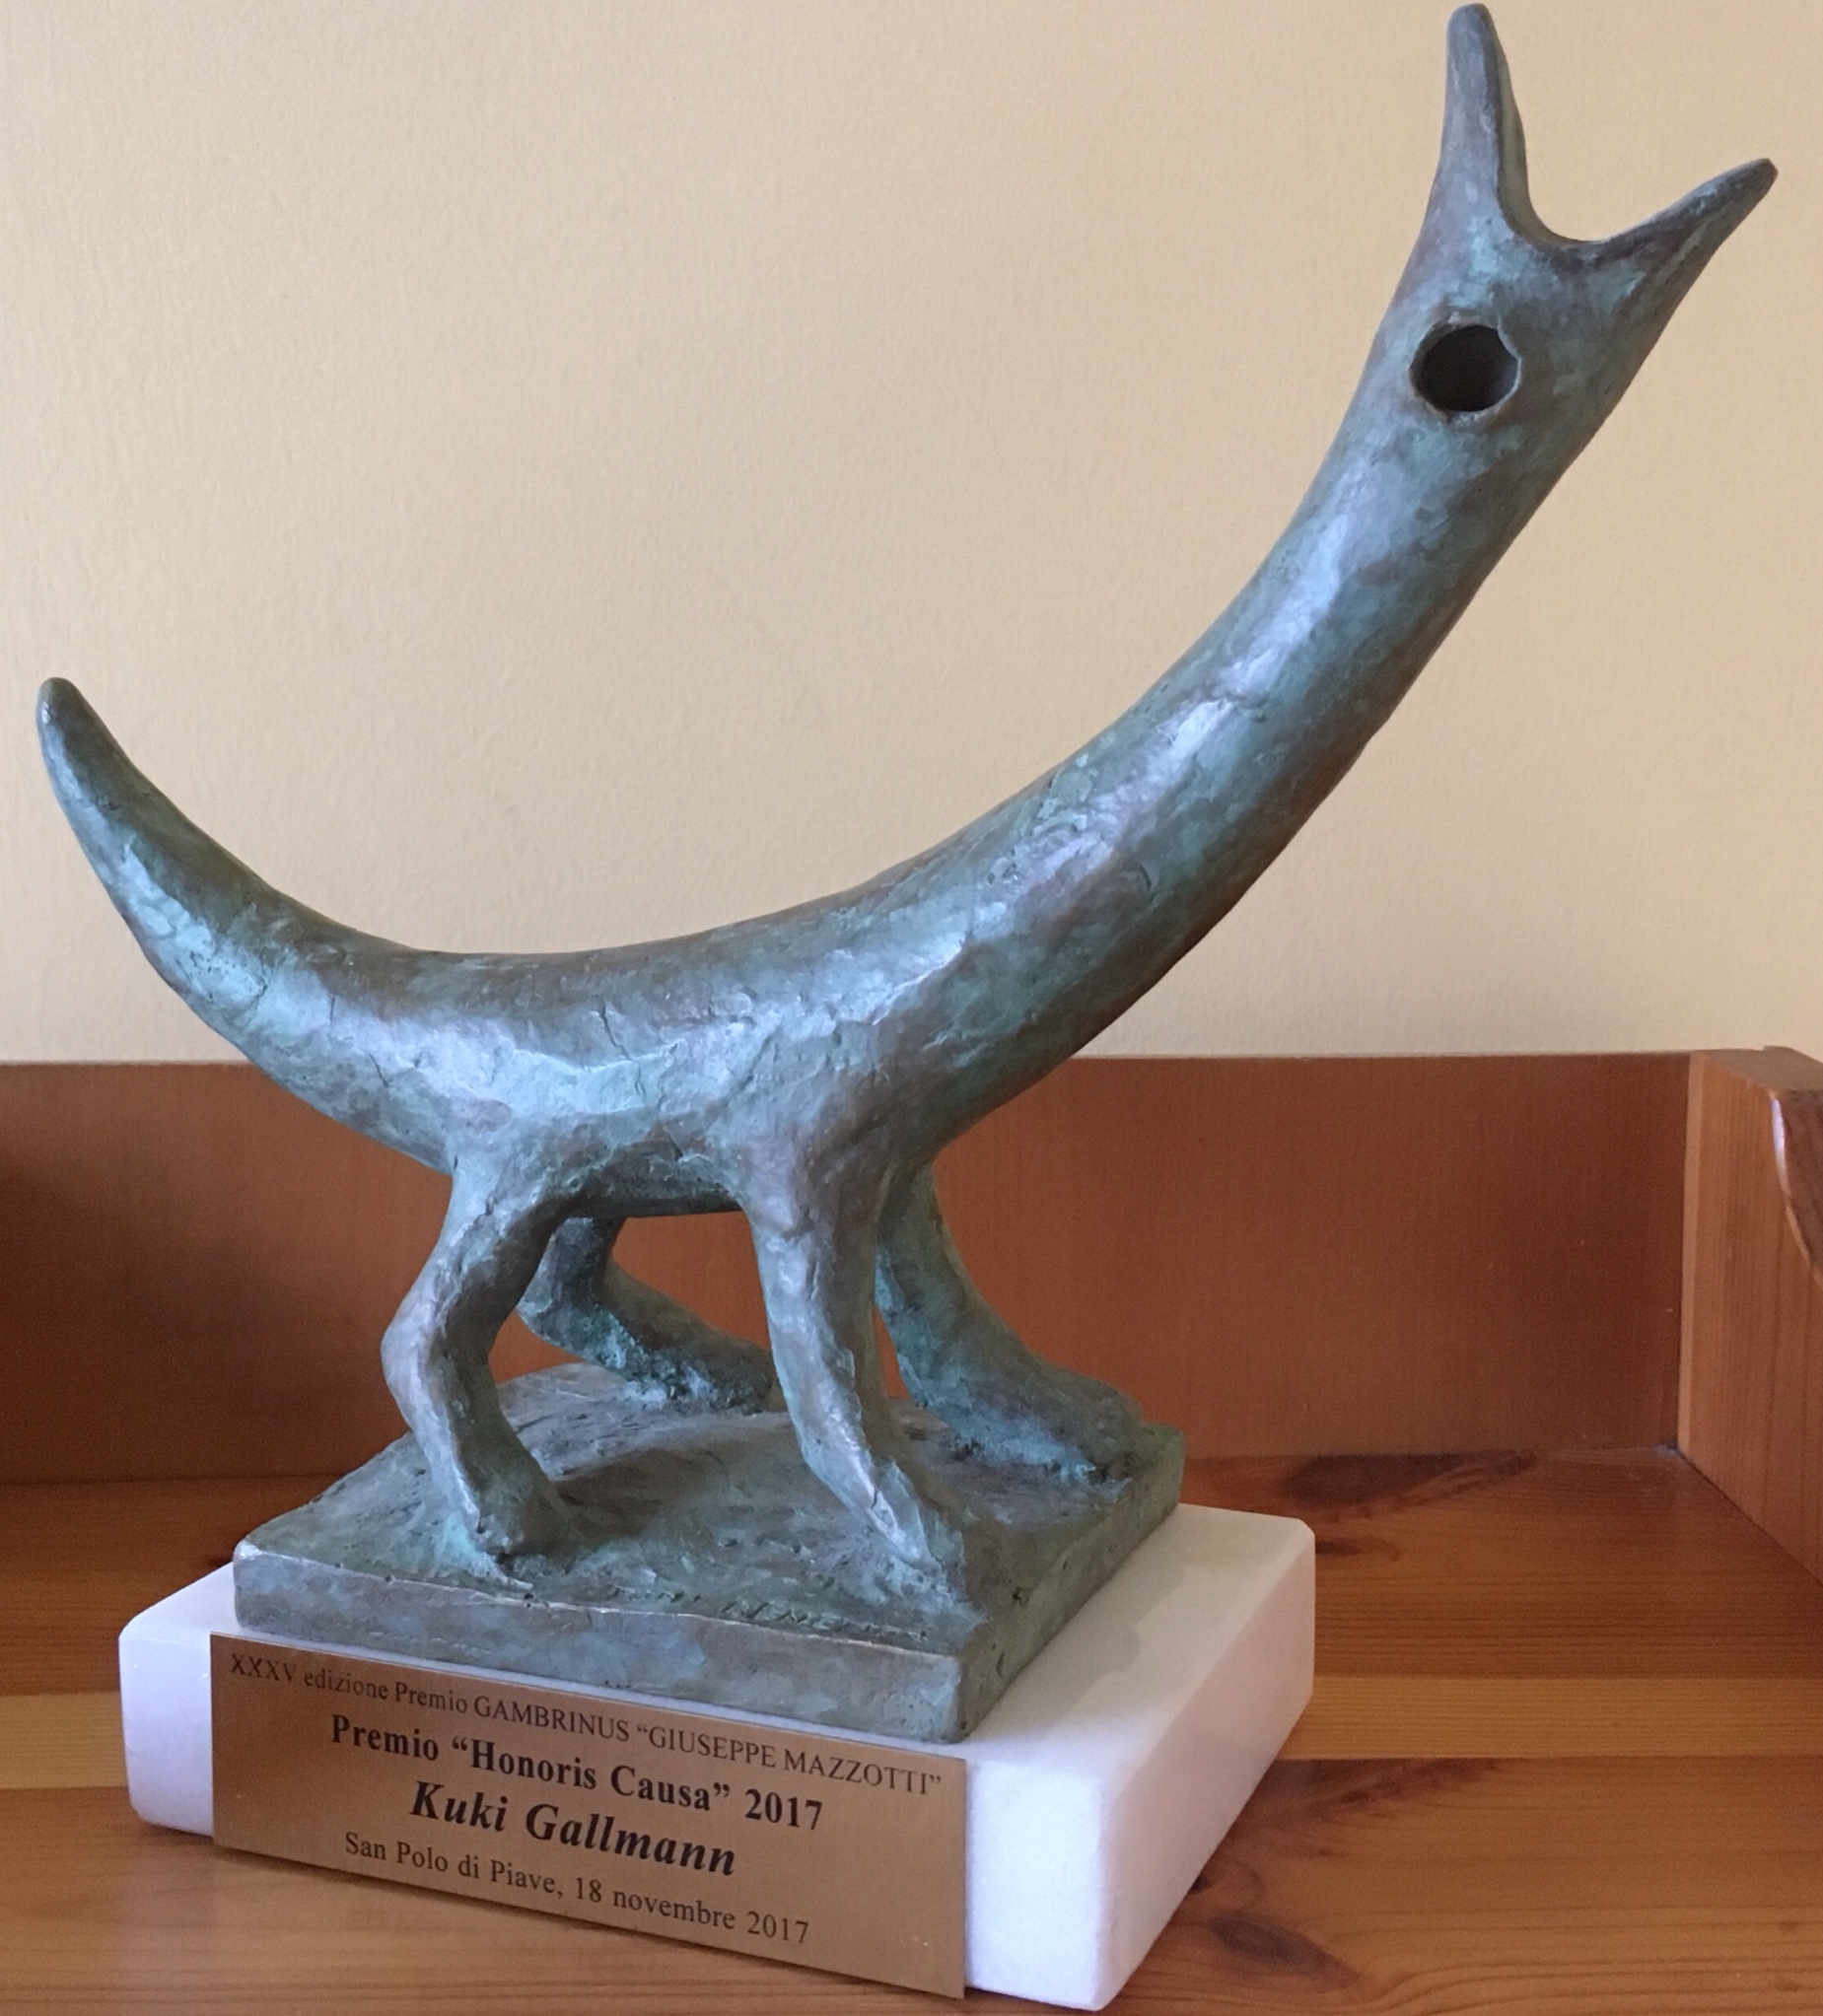 The award is the bronze reproduction of a life size sculpture of a mythical animal, by renown Italian sculptor Antonio Benetton.